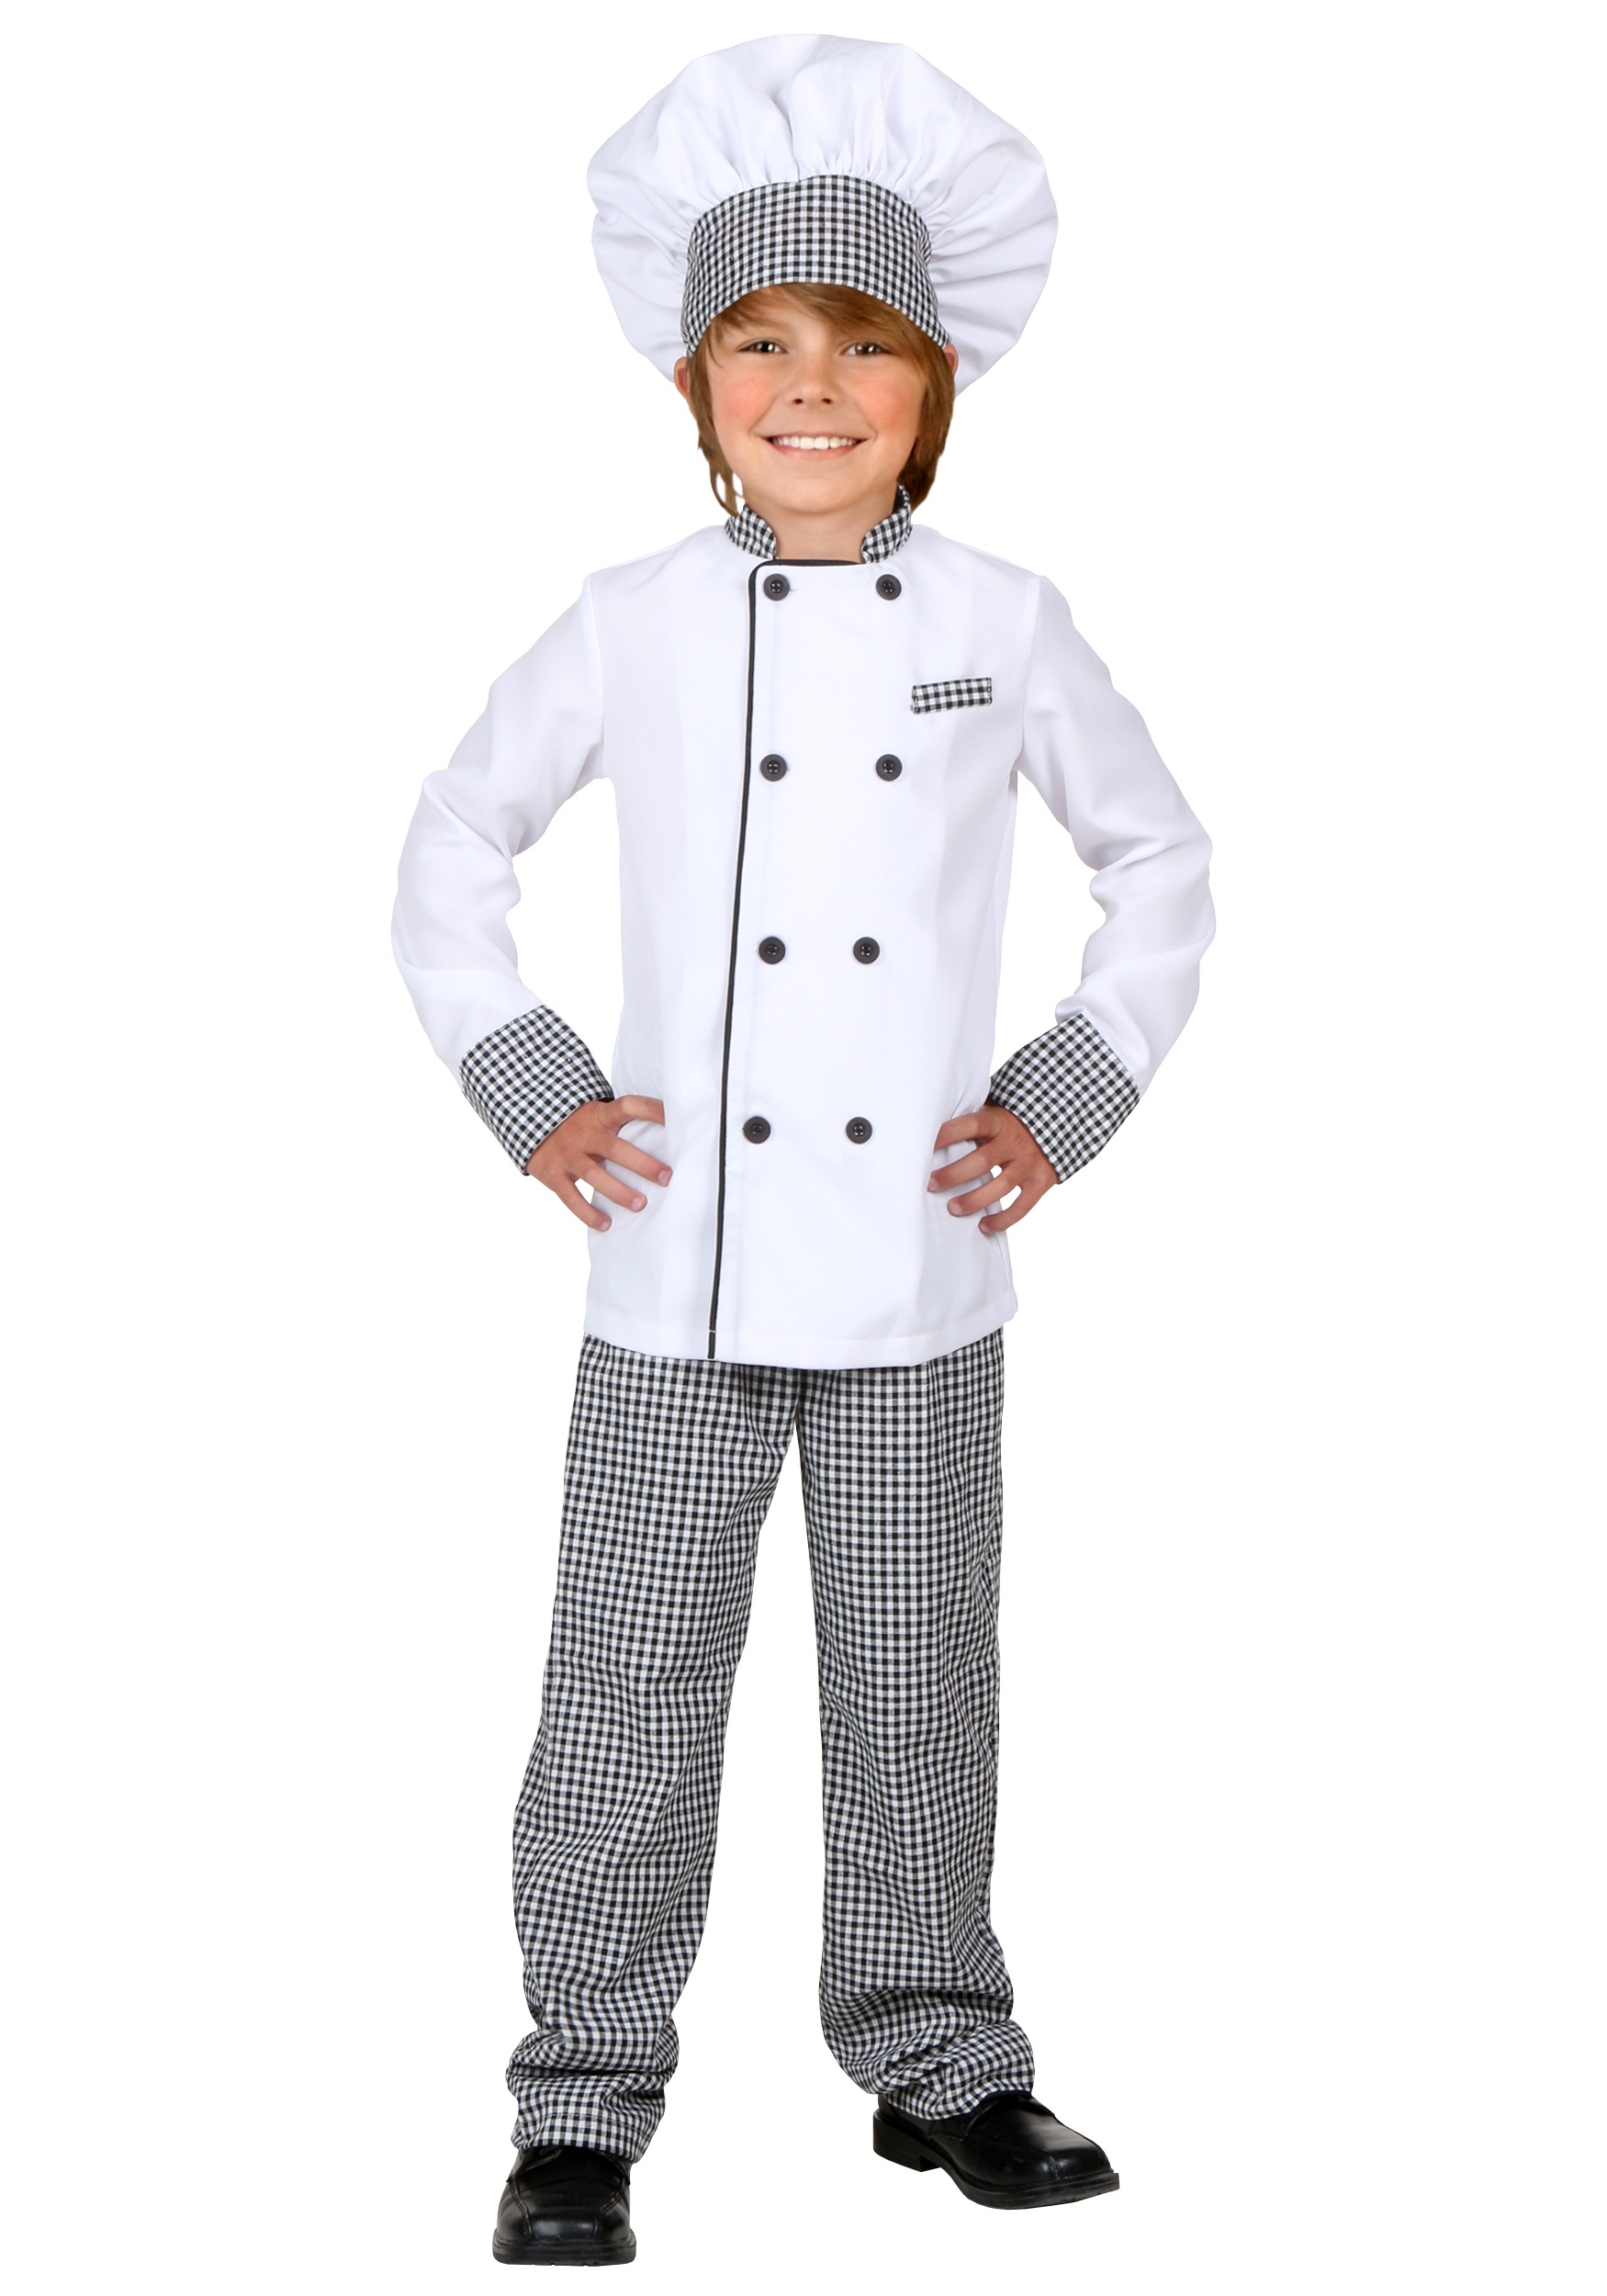 Chef Child Costume , Exclusive , Made By Us Costume